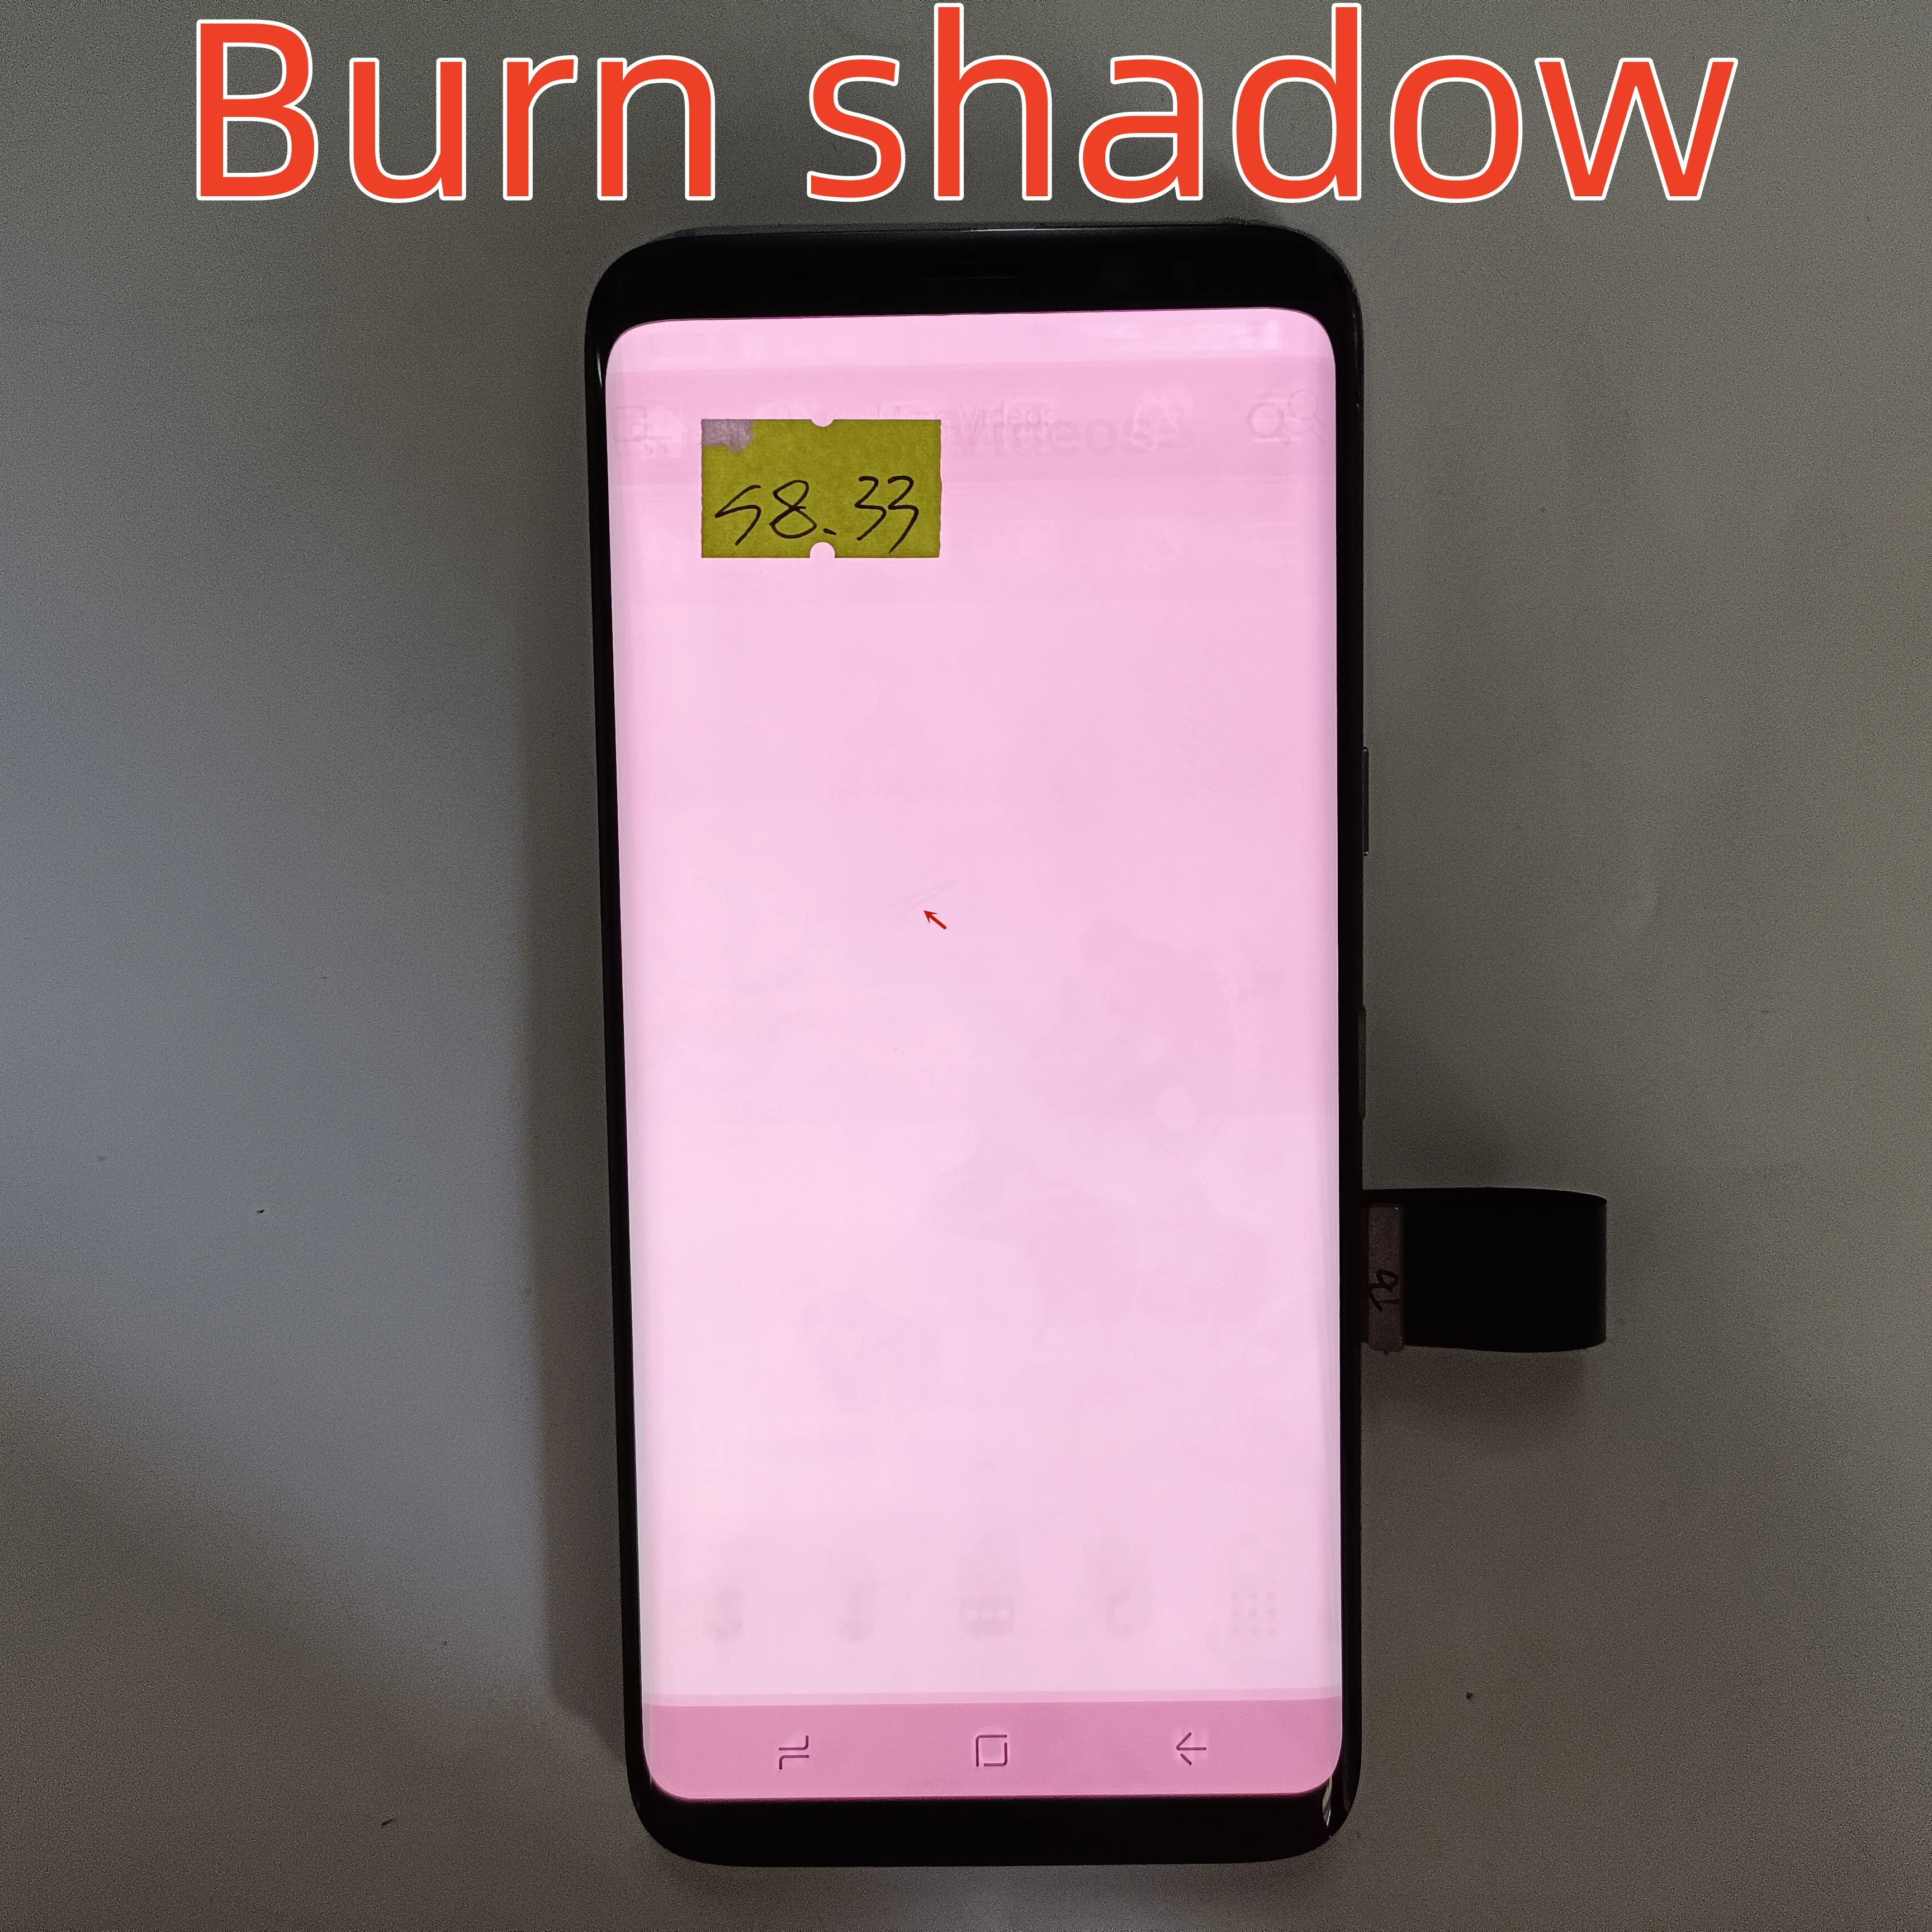 100% Original Amoled Display With Frame For Samsung Galaxy S8 G950F G950A G950U LCD Touch Screen Repair Parts With burn shadow images - 6